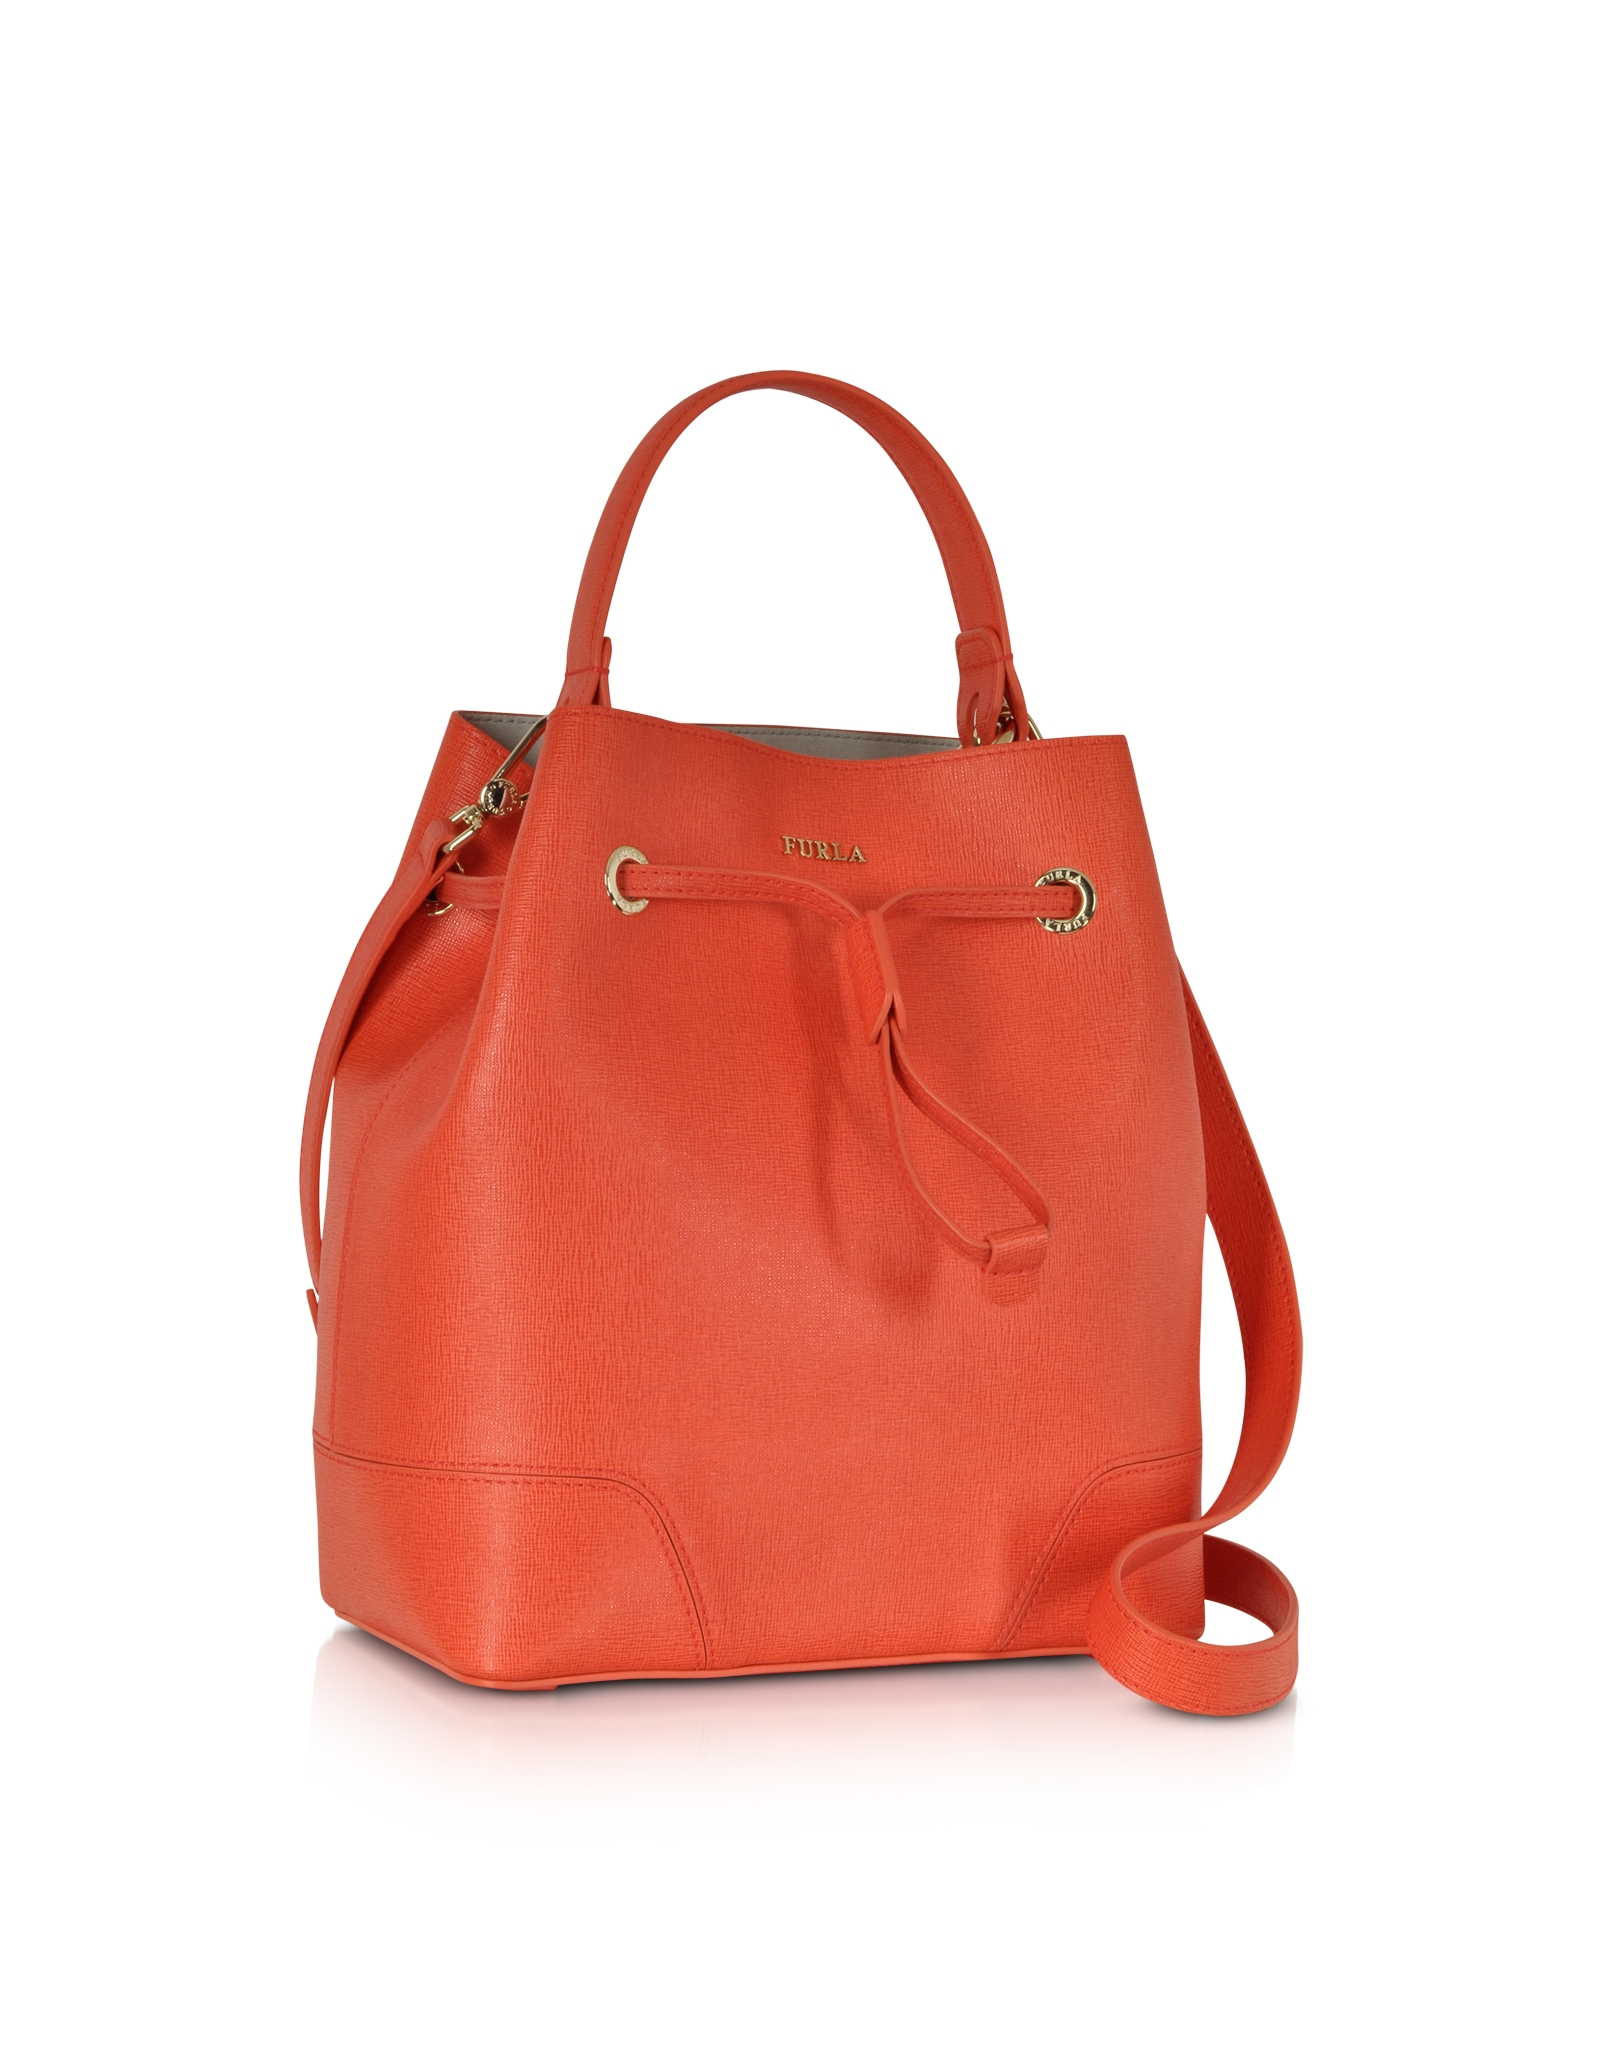 Furla Stacy Small Bucket Bag in Natural - Lyst